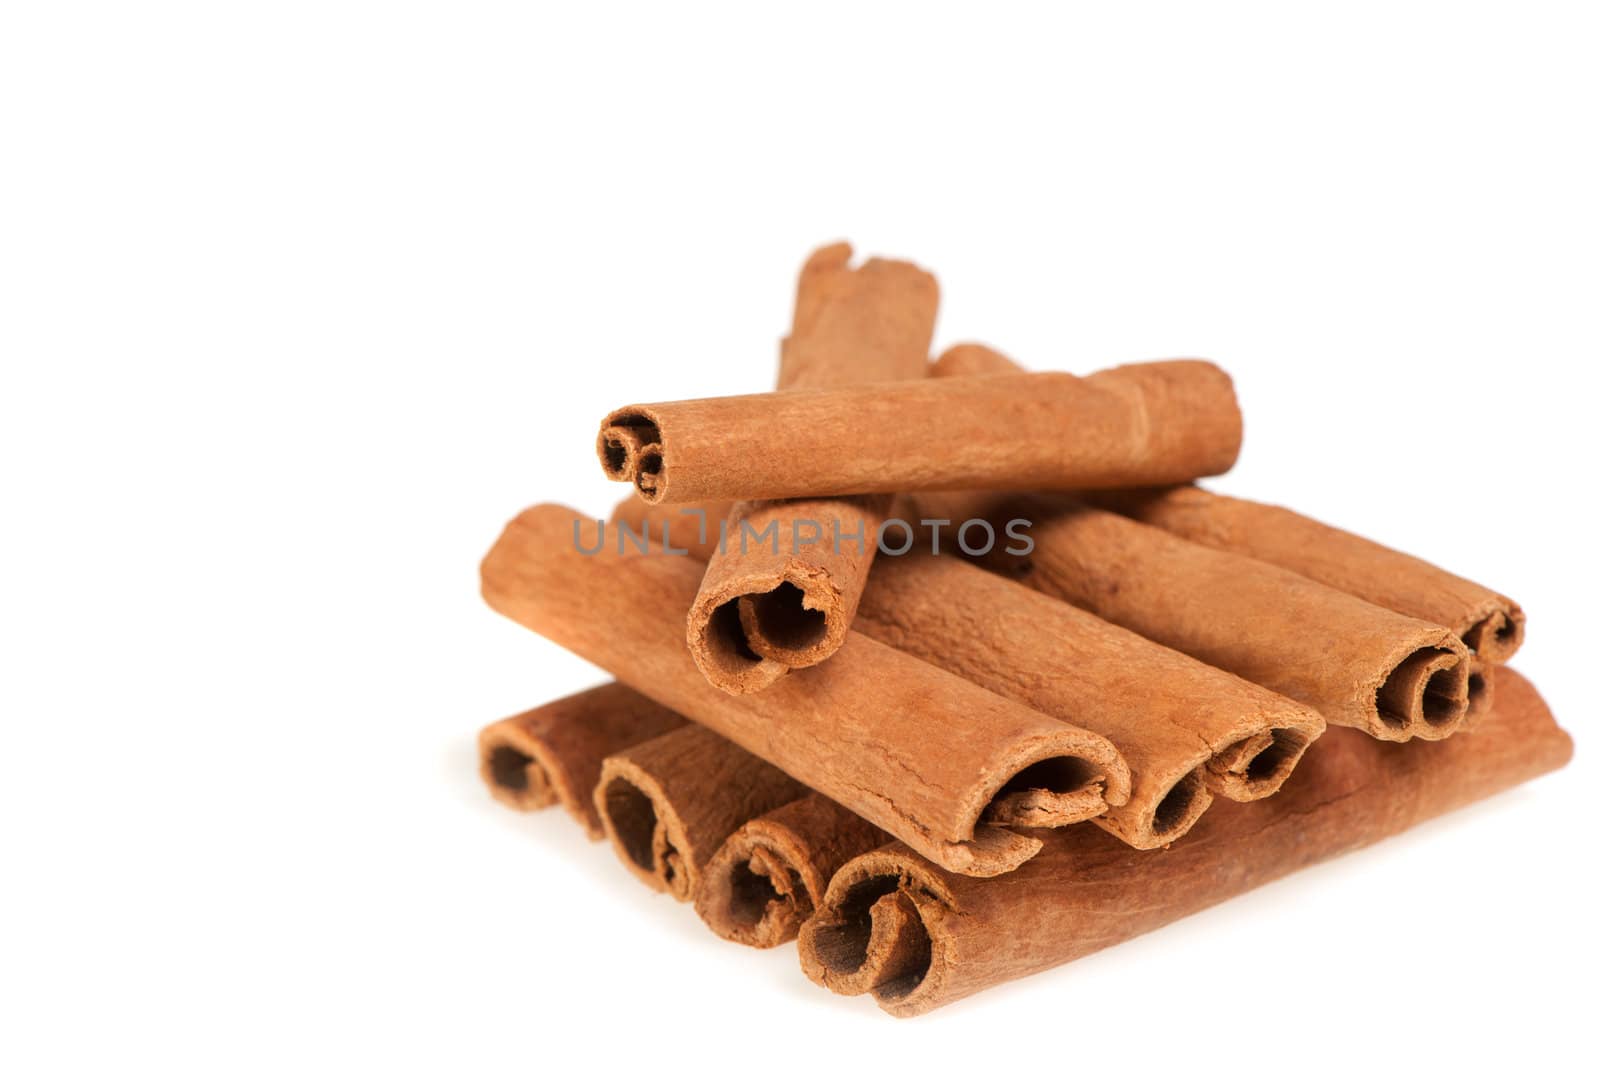 Cinnamon. A heap of sticks of cinnamon on a white background